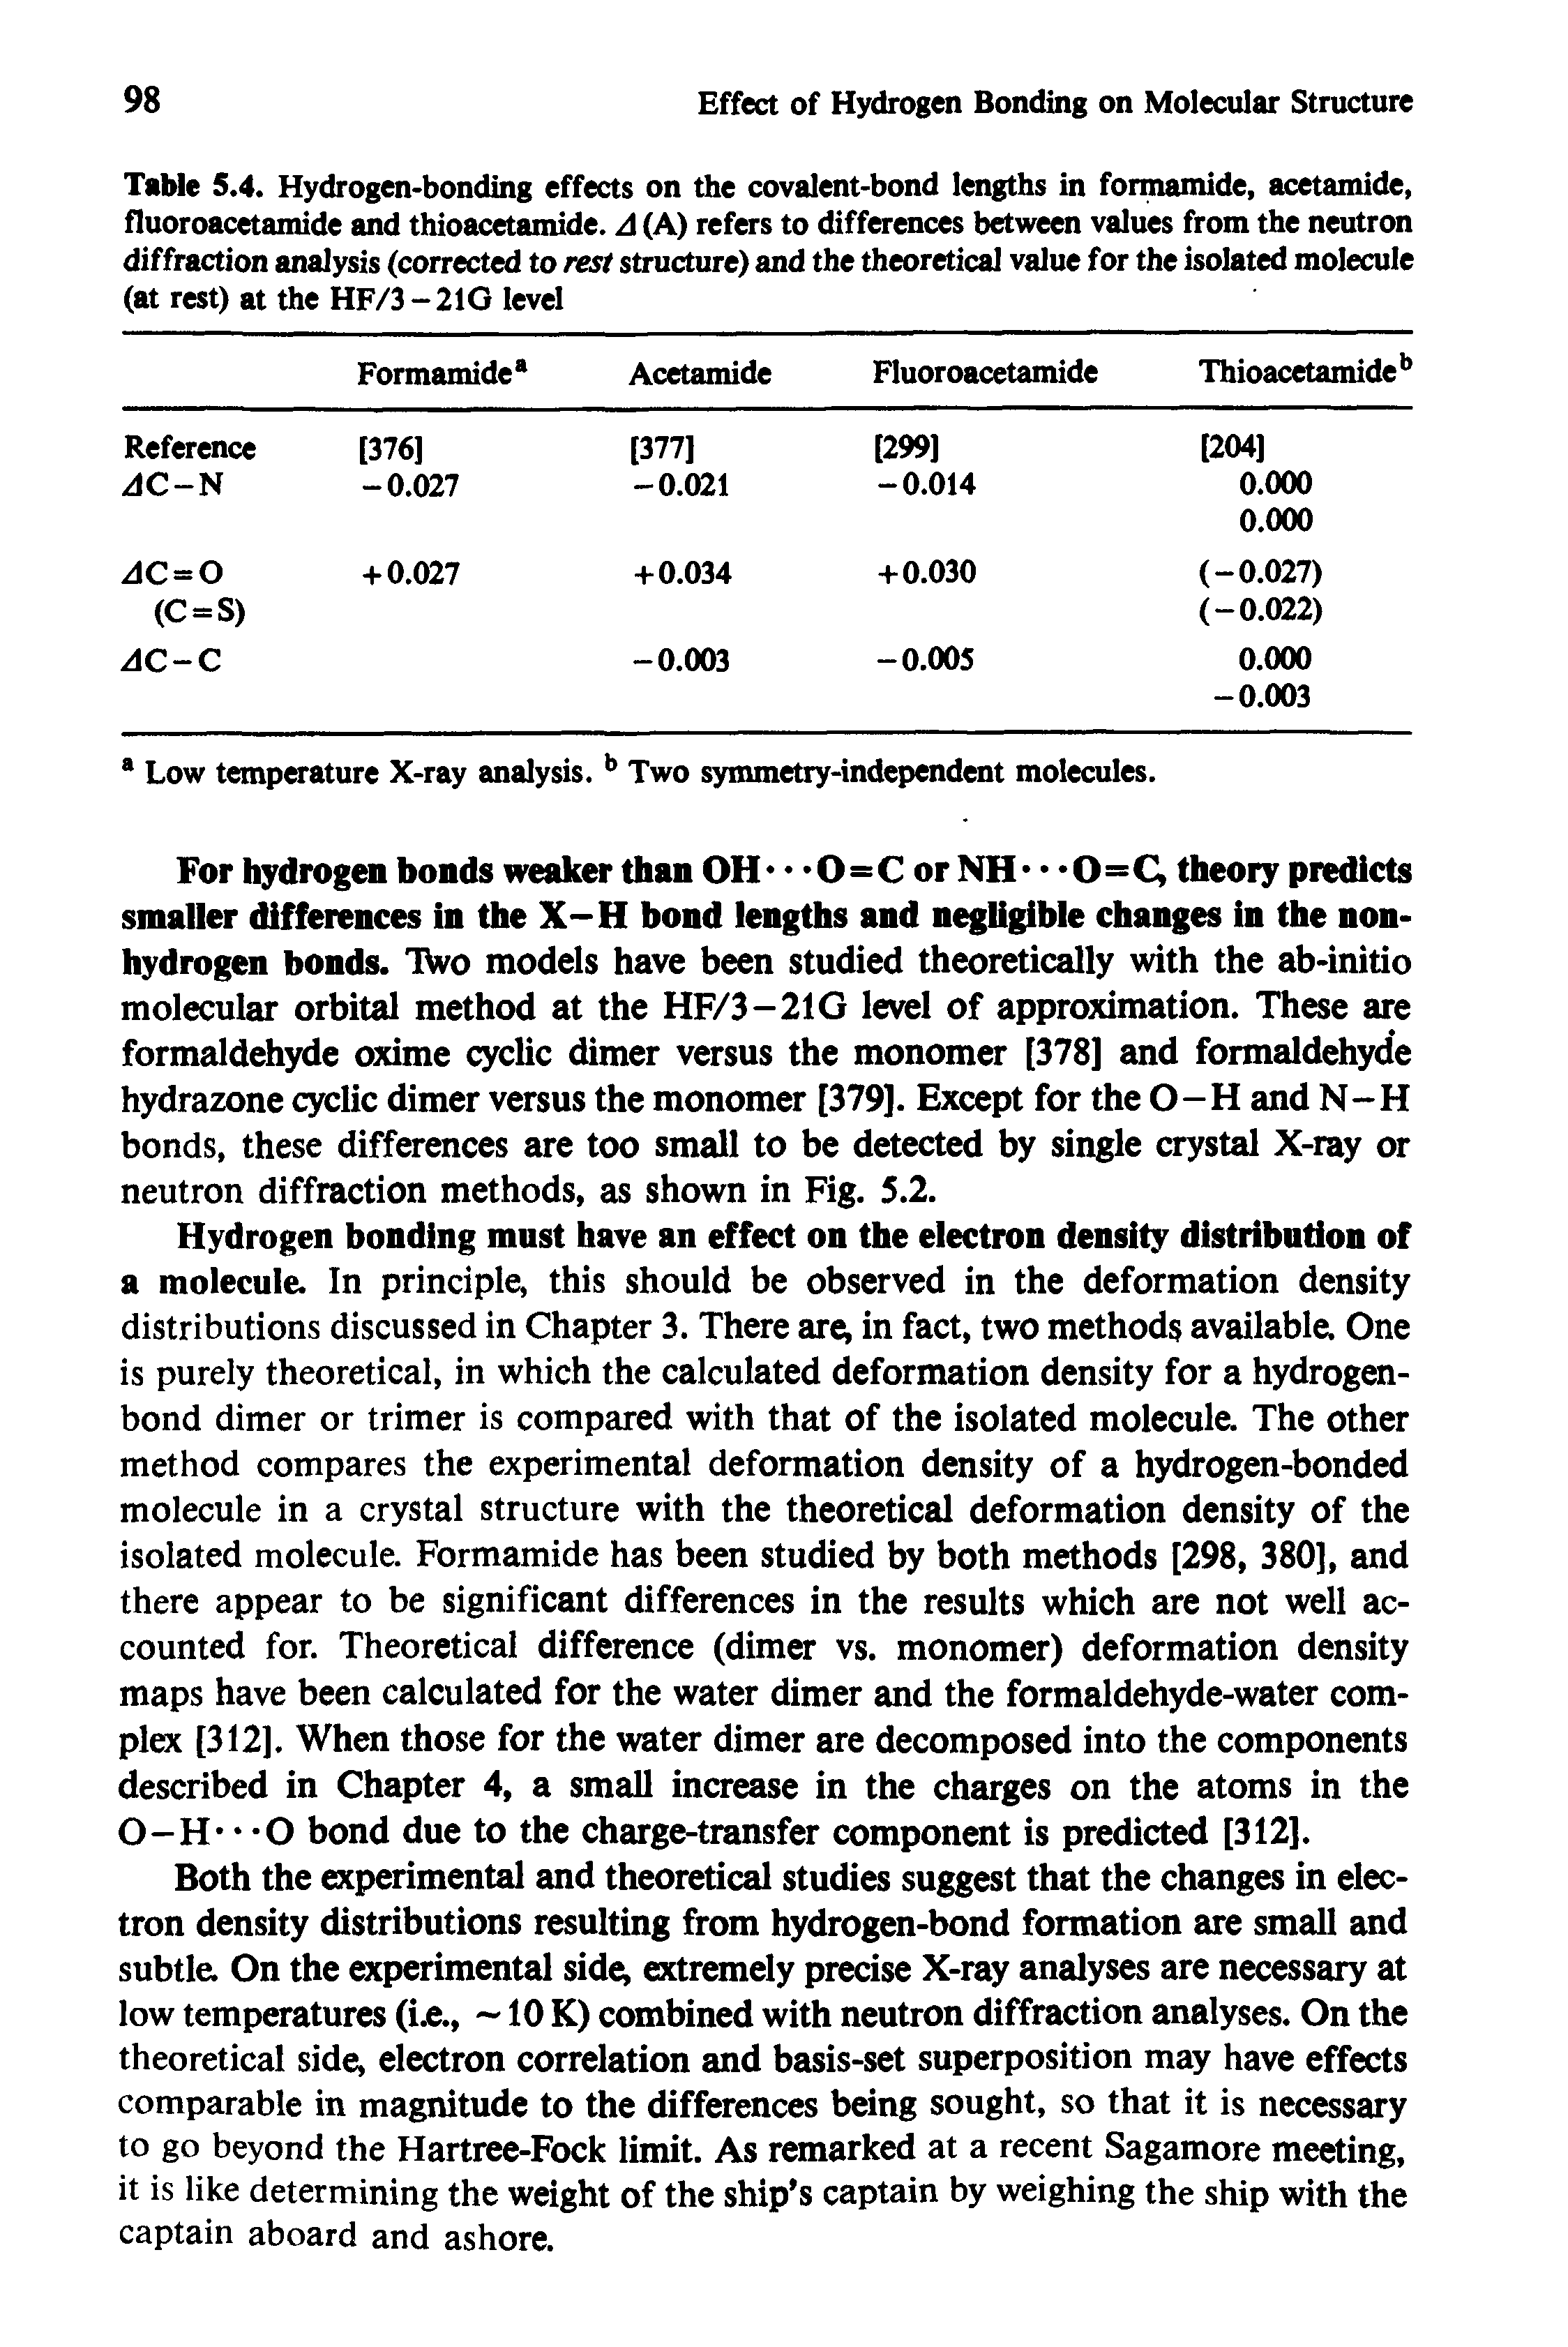 Table 5.4. Hydrogen-bonding effects on the covalent-bond lengths in formamide, acetamide, fluoroacetamide and thioacetamide. A (A) refers to differences between values from the neutron diffraction analysis (corrected to rest structure) and the theoretical value for the isolated molecule (at rest) at the HF/3 - 210 level...